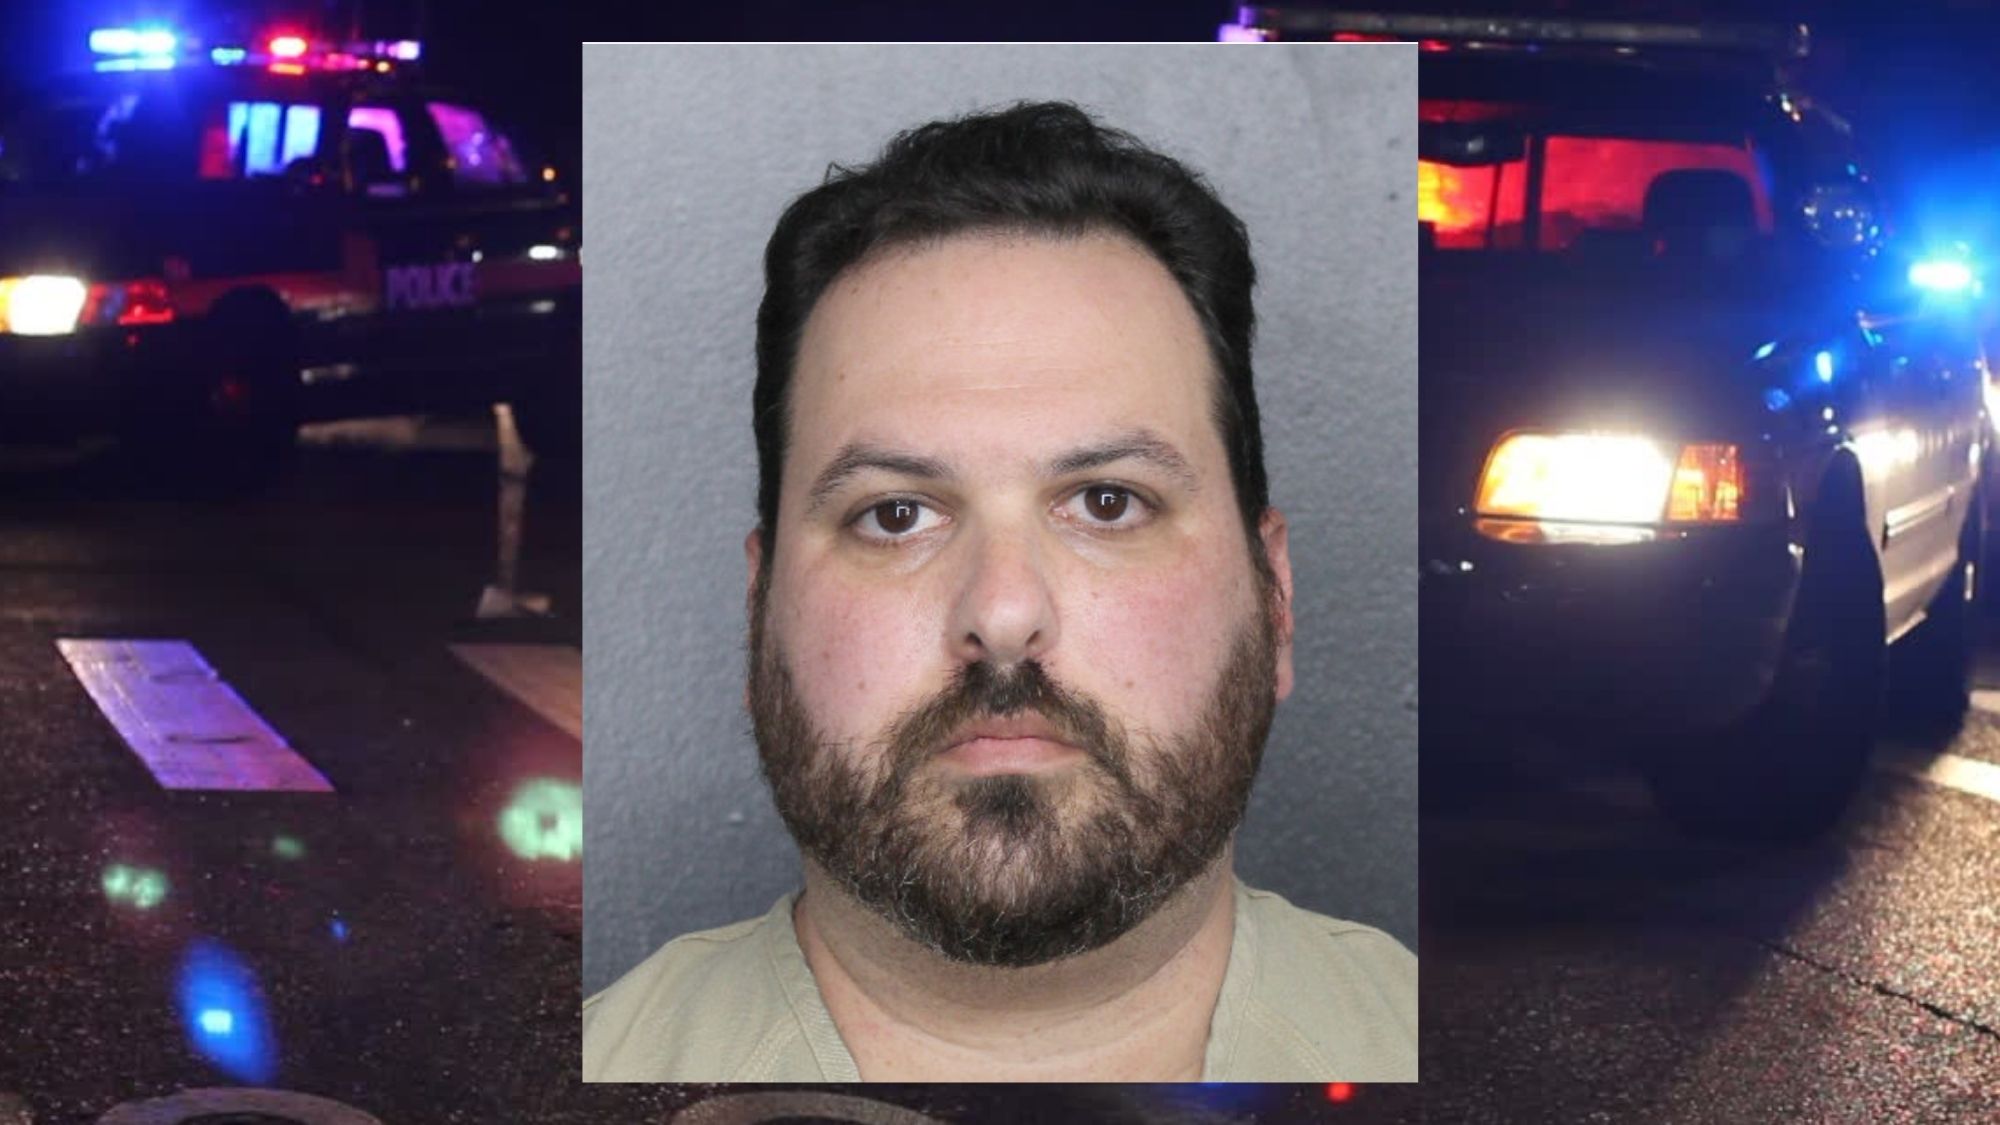 Tamarac Man Arrested For Raping Child: “I’m a Piece of S--- and I Deserve to go to Jail”